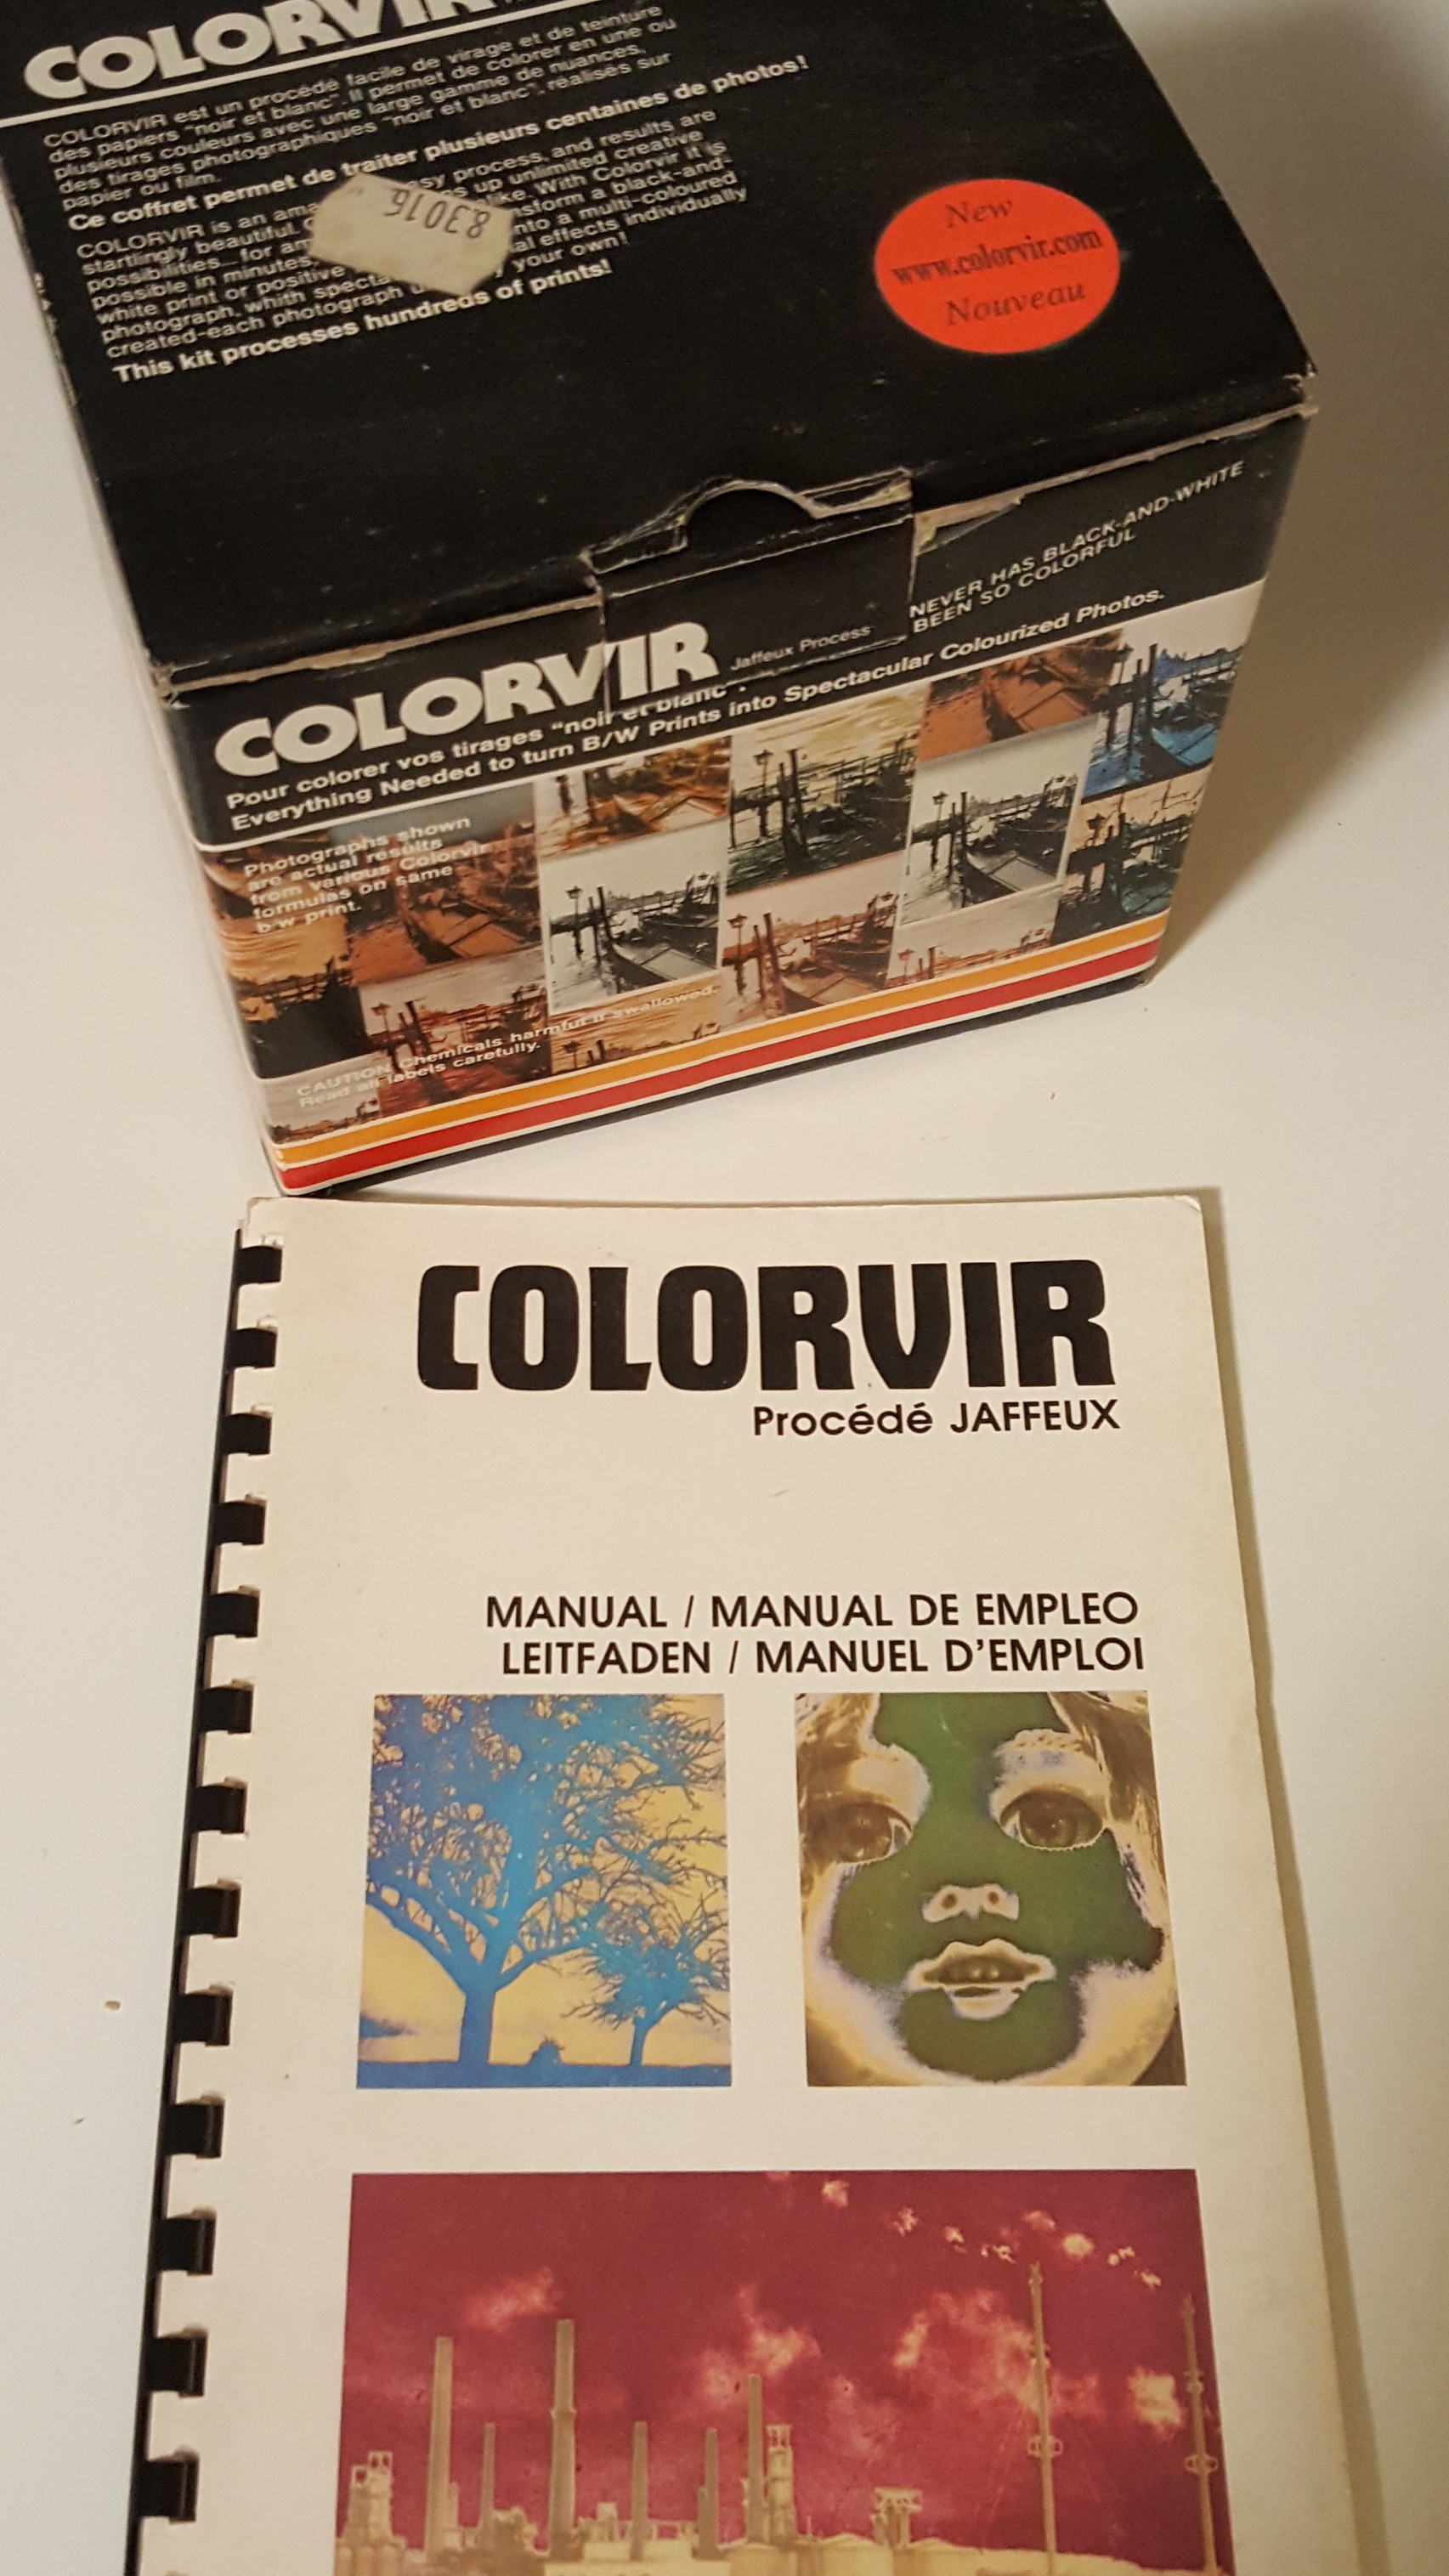 Coloring B/W film – An attempt with Colorvir